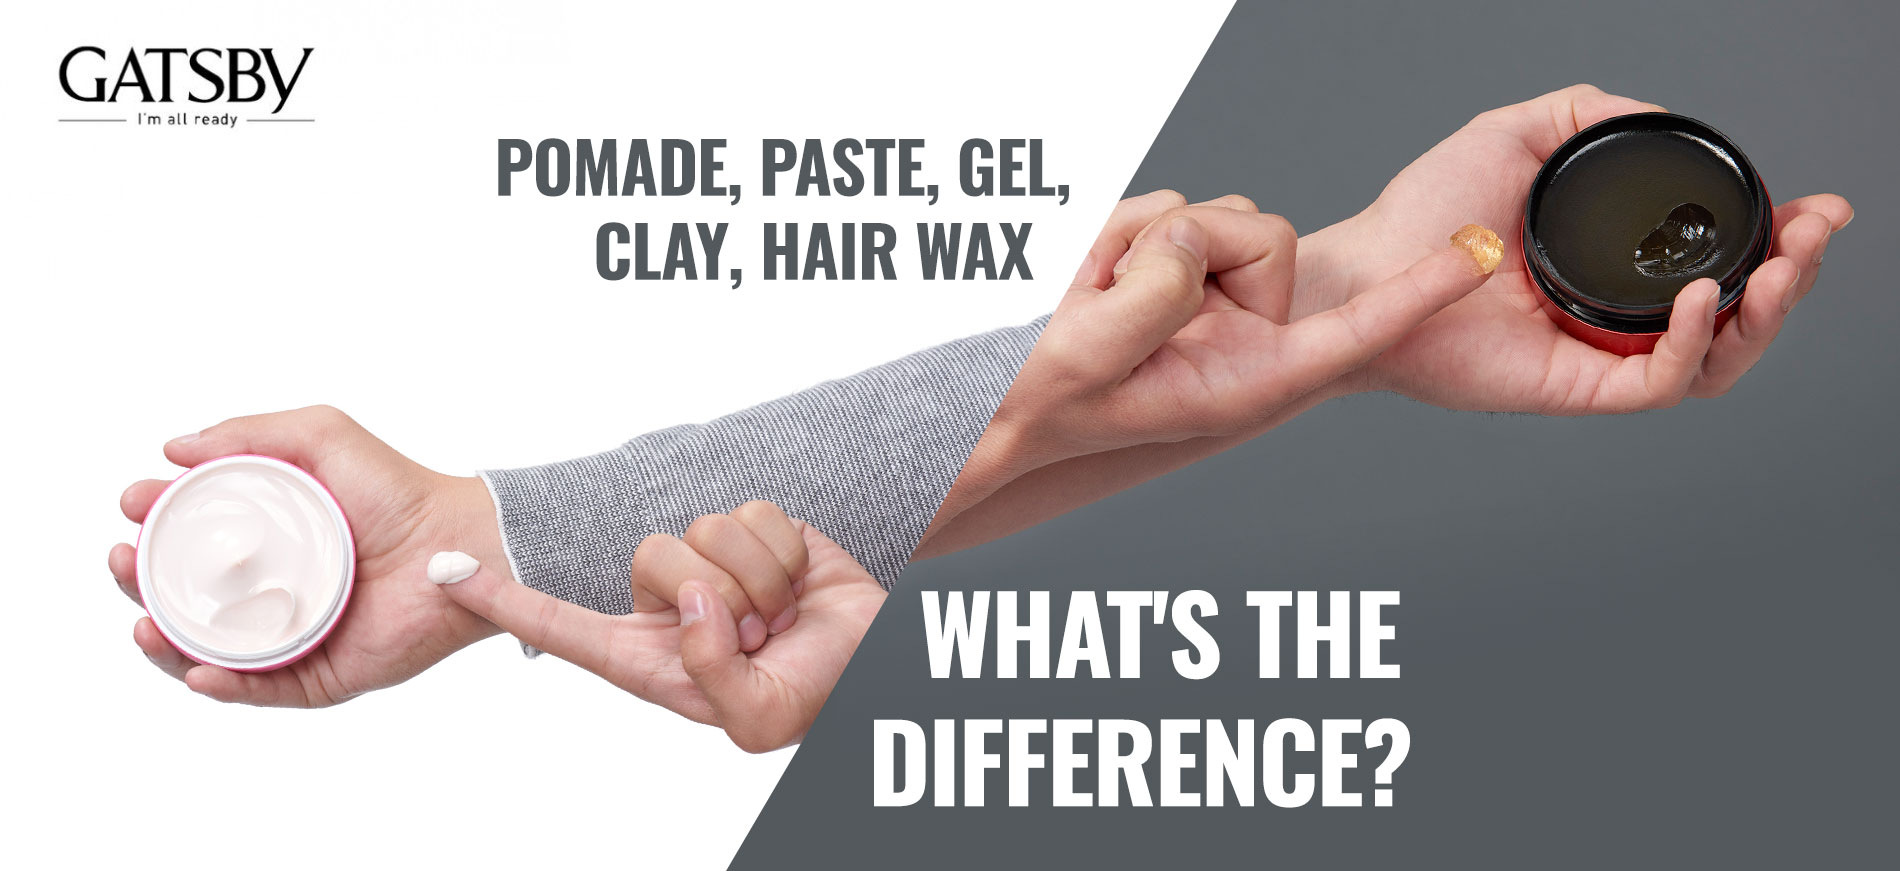 Pomade, Paste, Gel, Clay, Hair Wax - What’s The Difference?